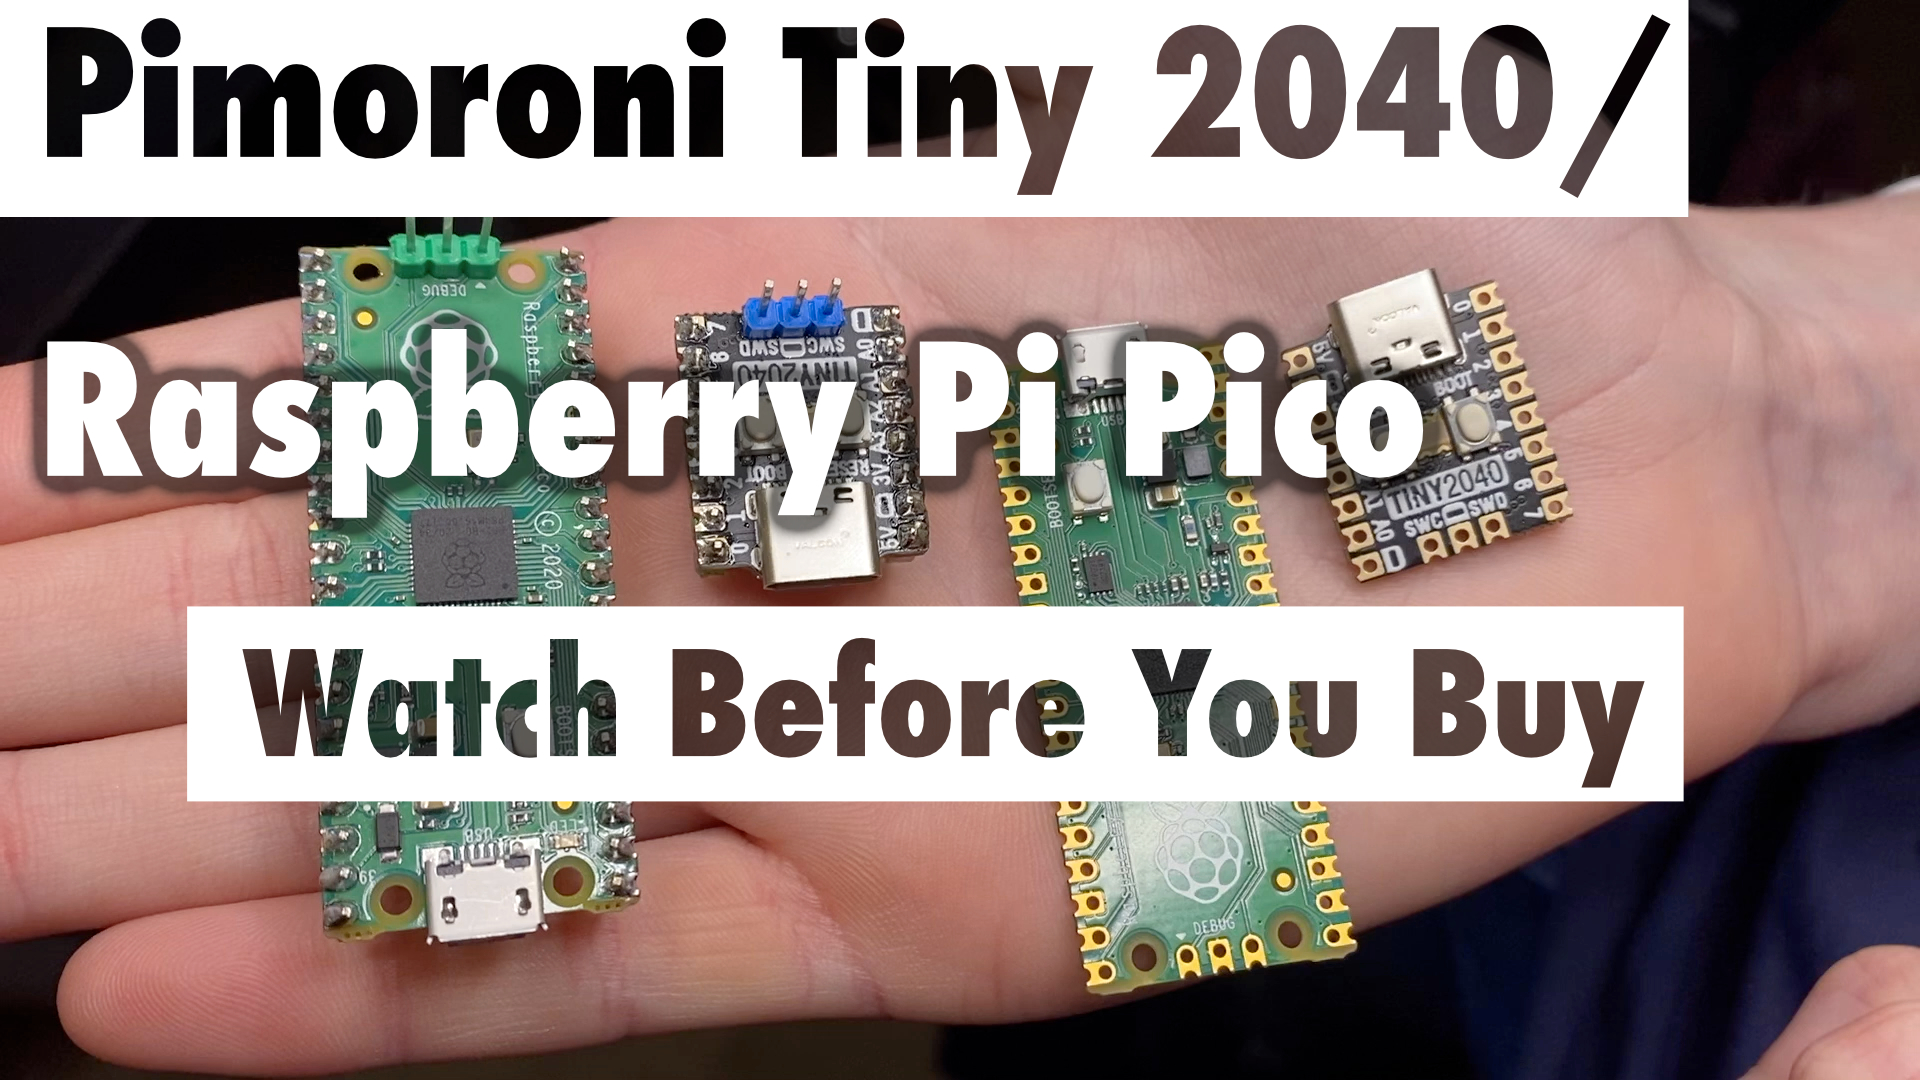 tiny 2040 and raspberry pi pico in a hand